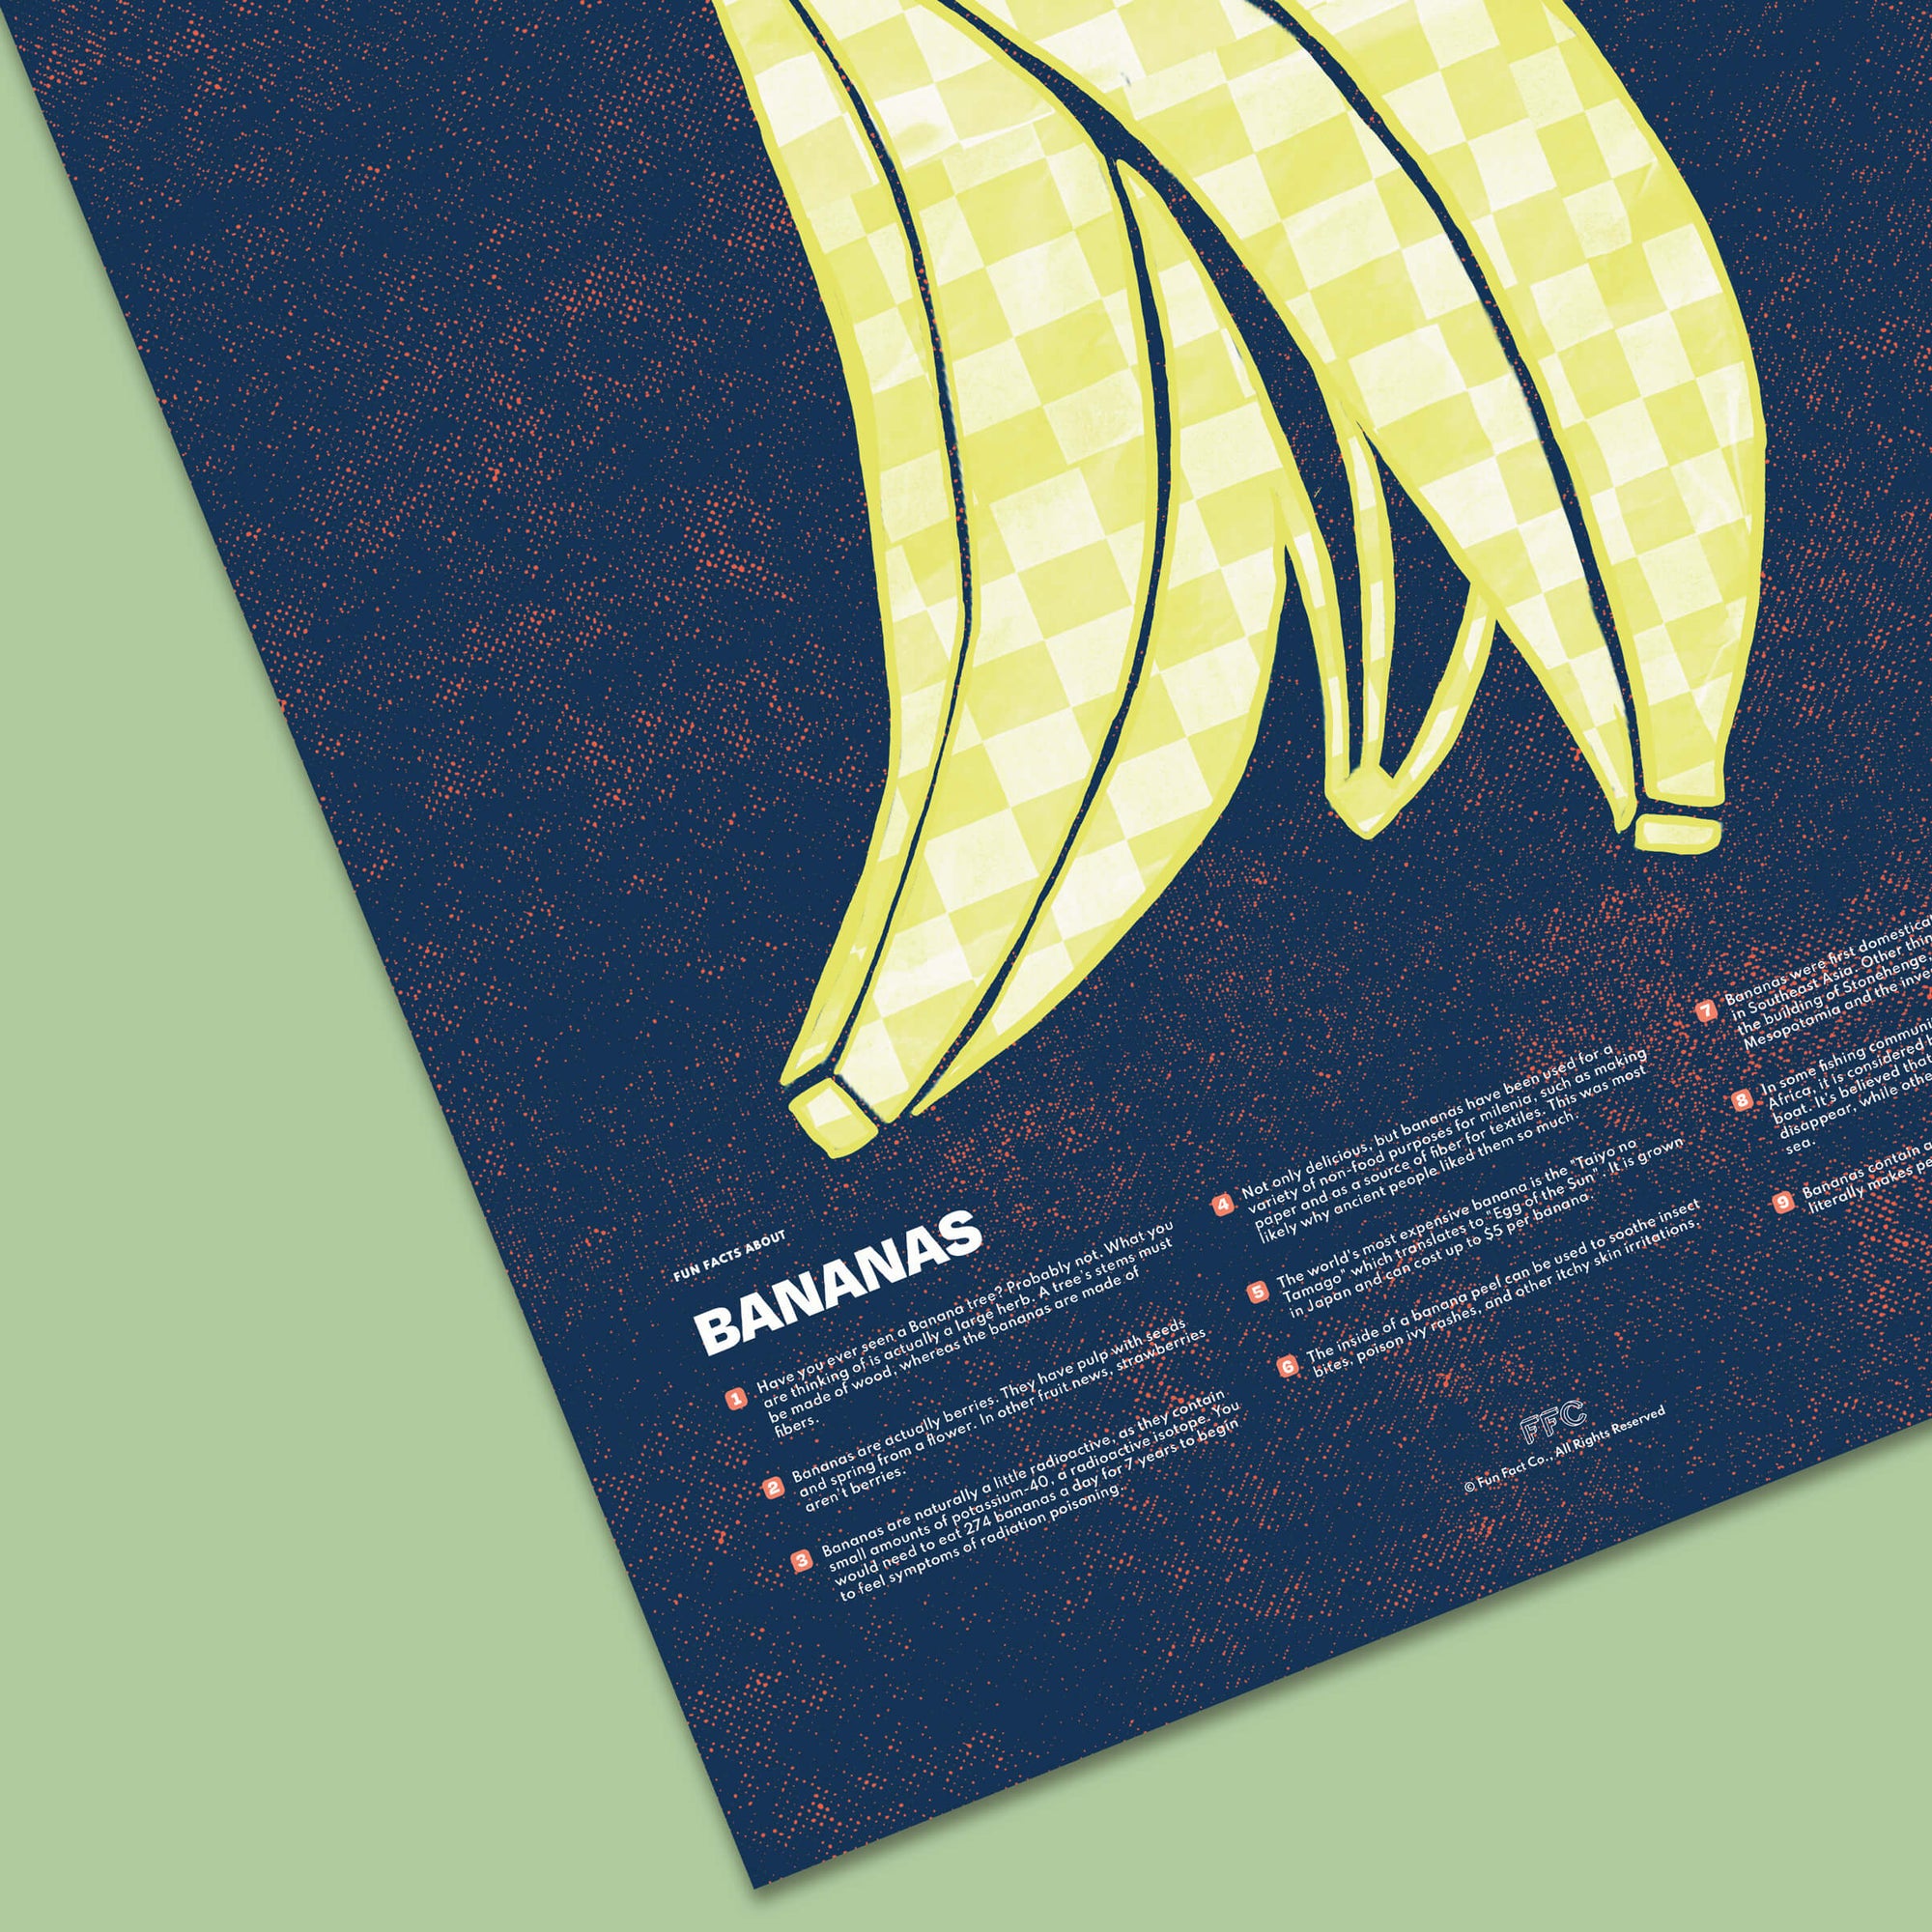 modern illustration banana facts poster by fun fact co. - close up view